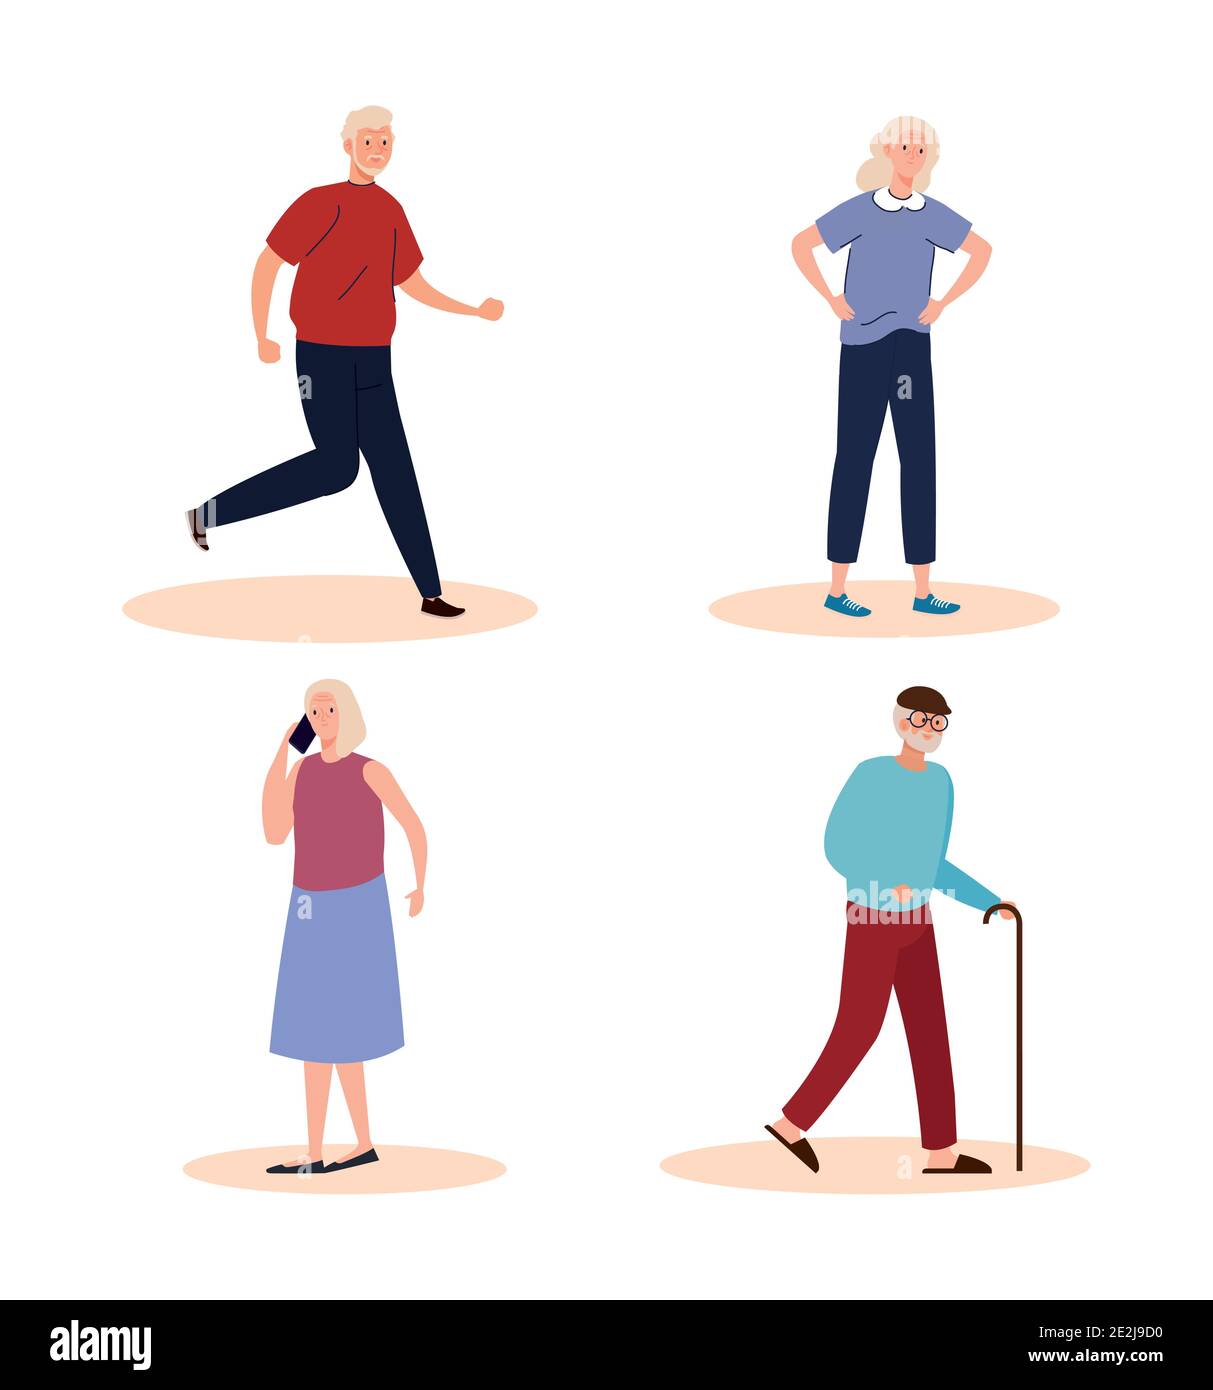 group of four elderly old people characters Stock Vector